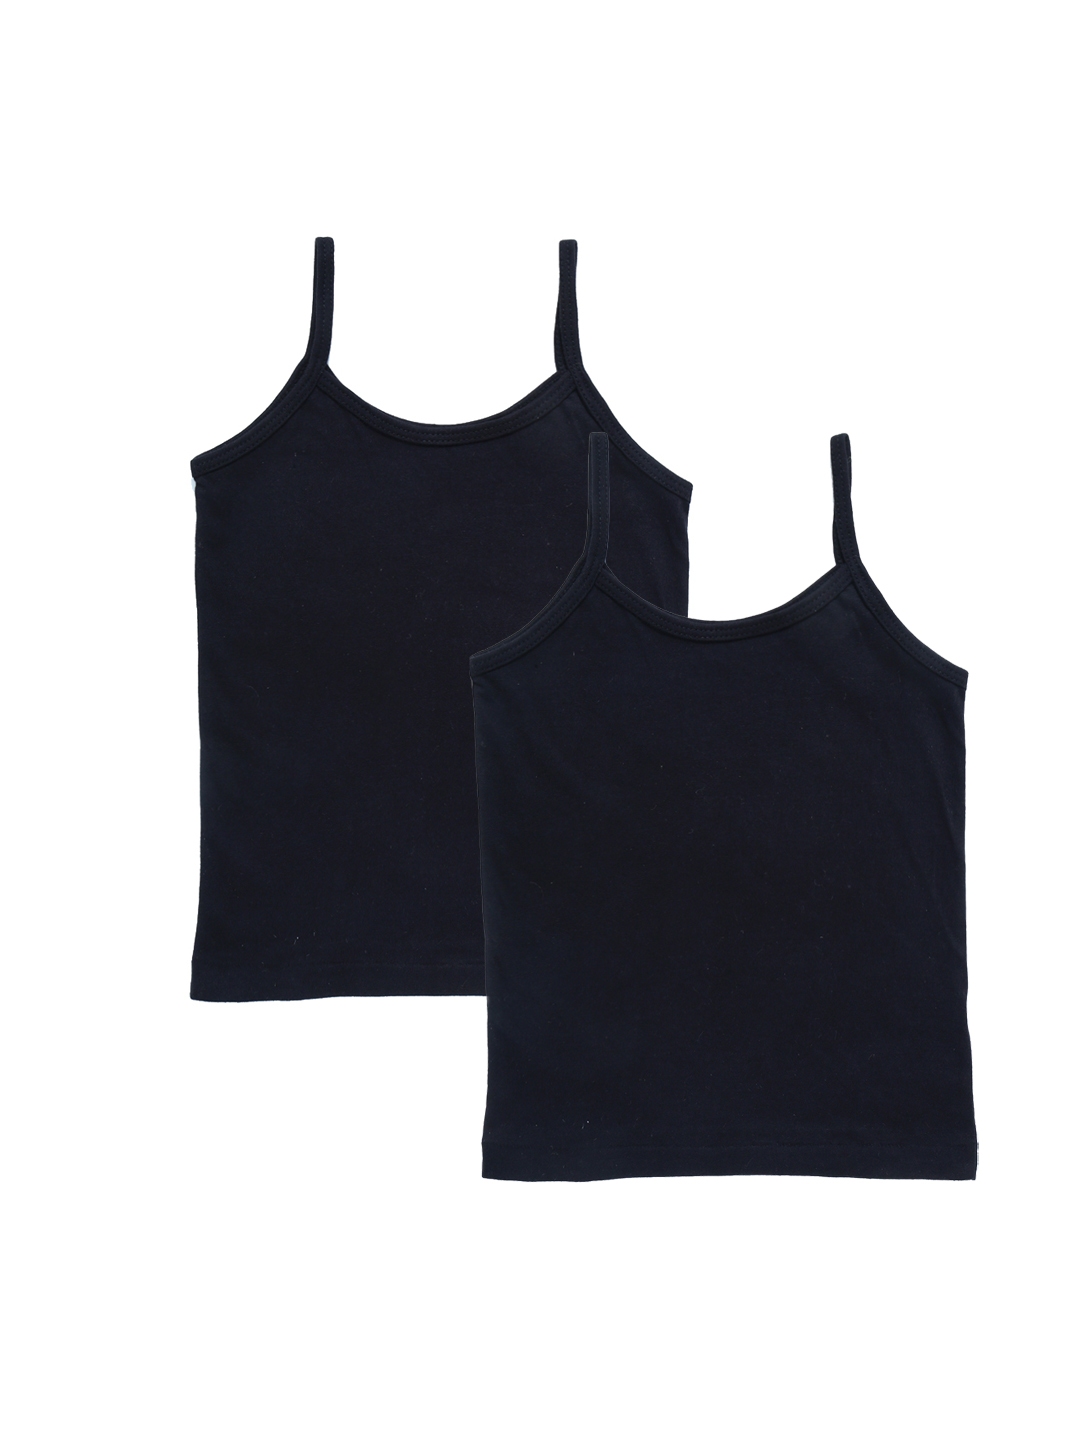 Buy YK Girls Pack Of 2 Black Solid Spaghetti Vests - Camisoles for Girls  11950788